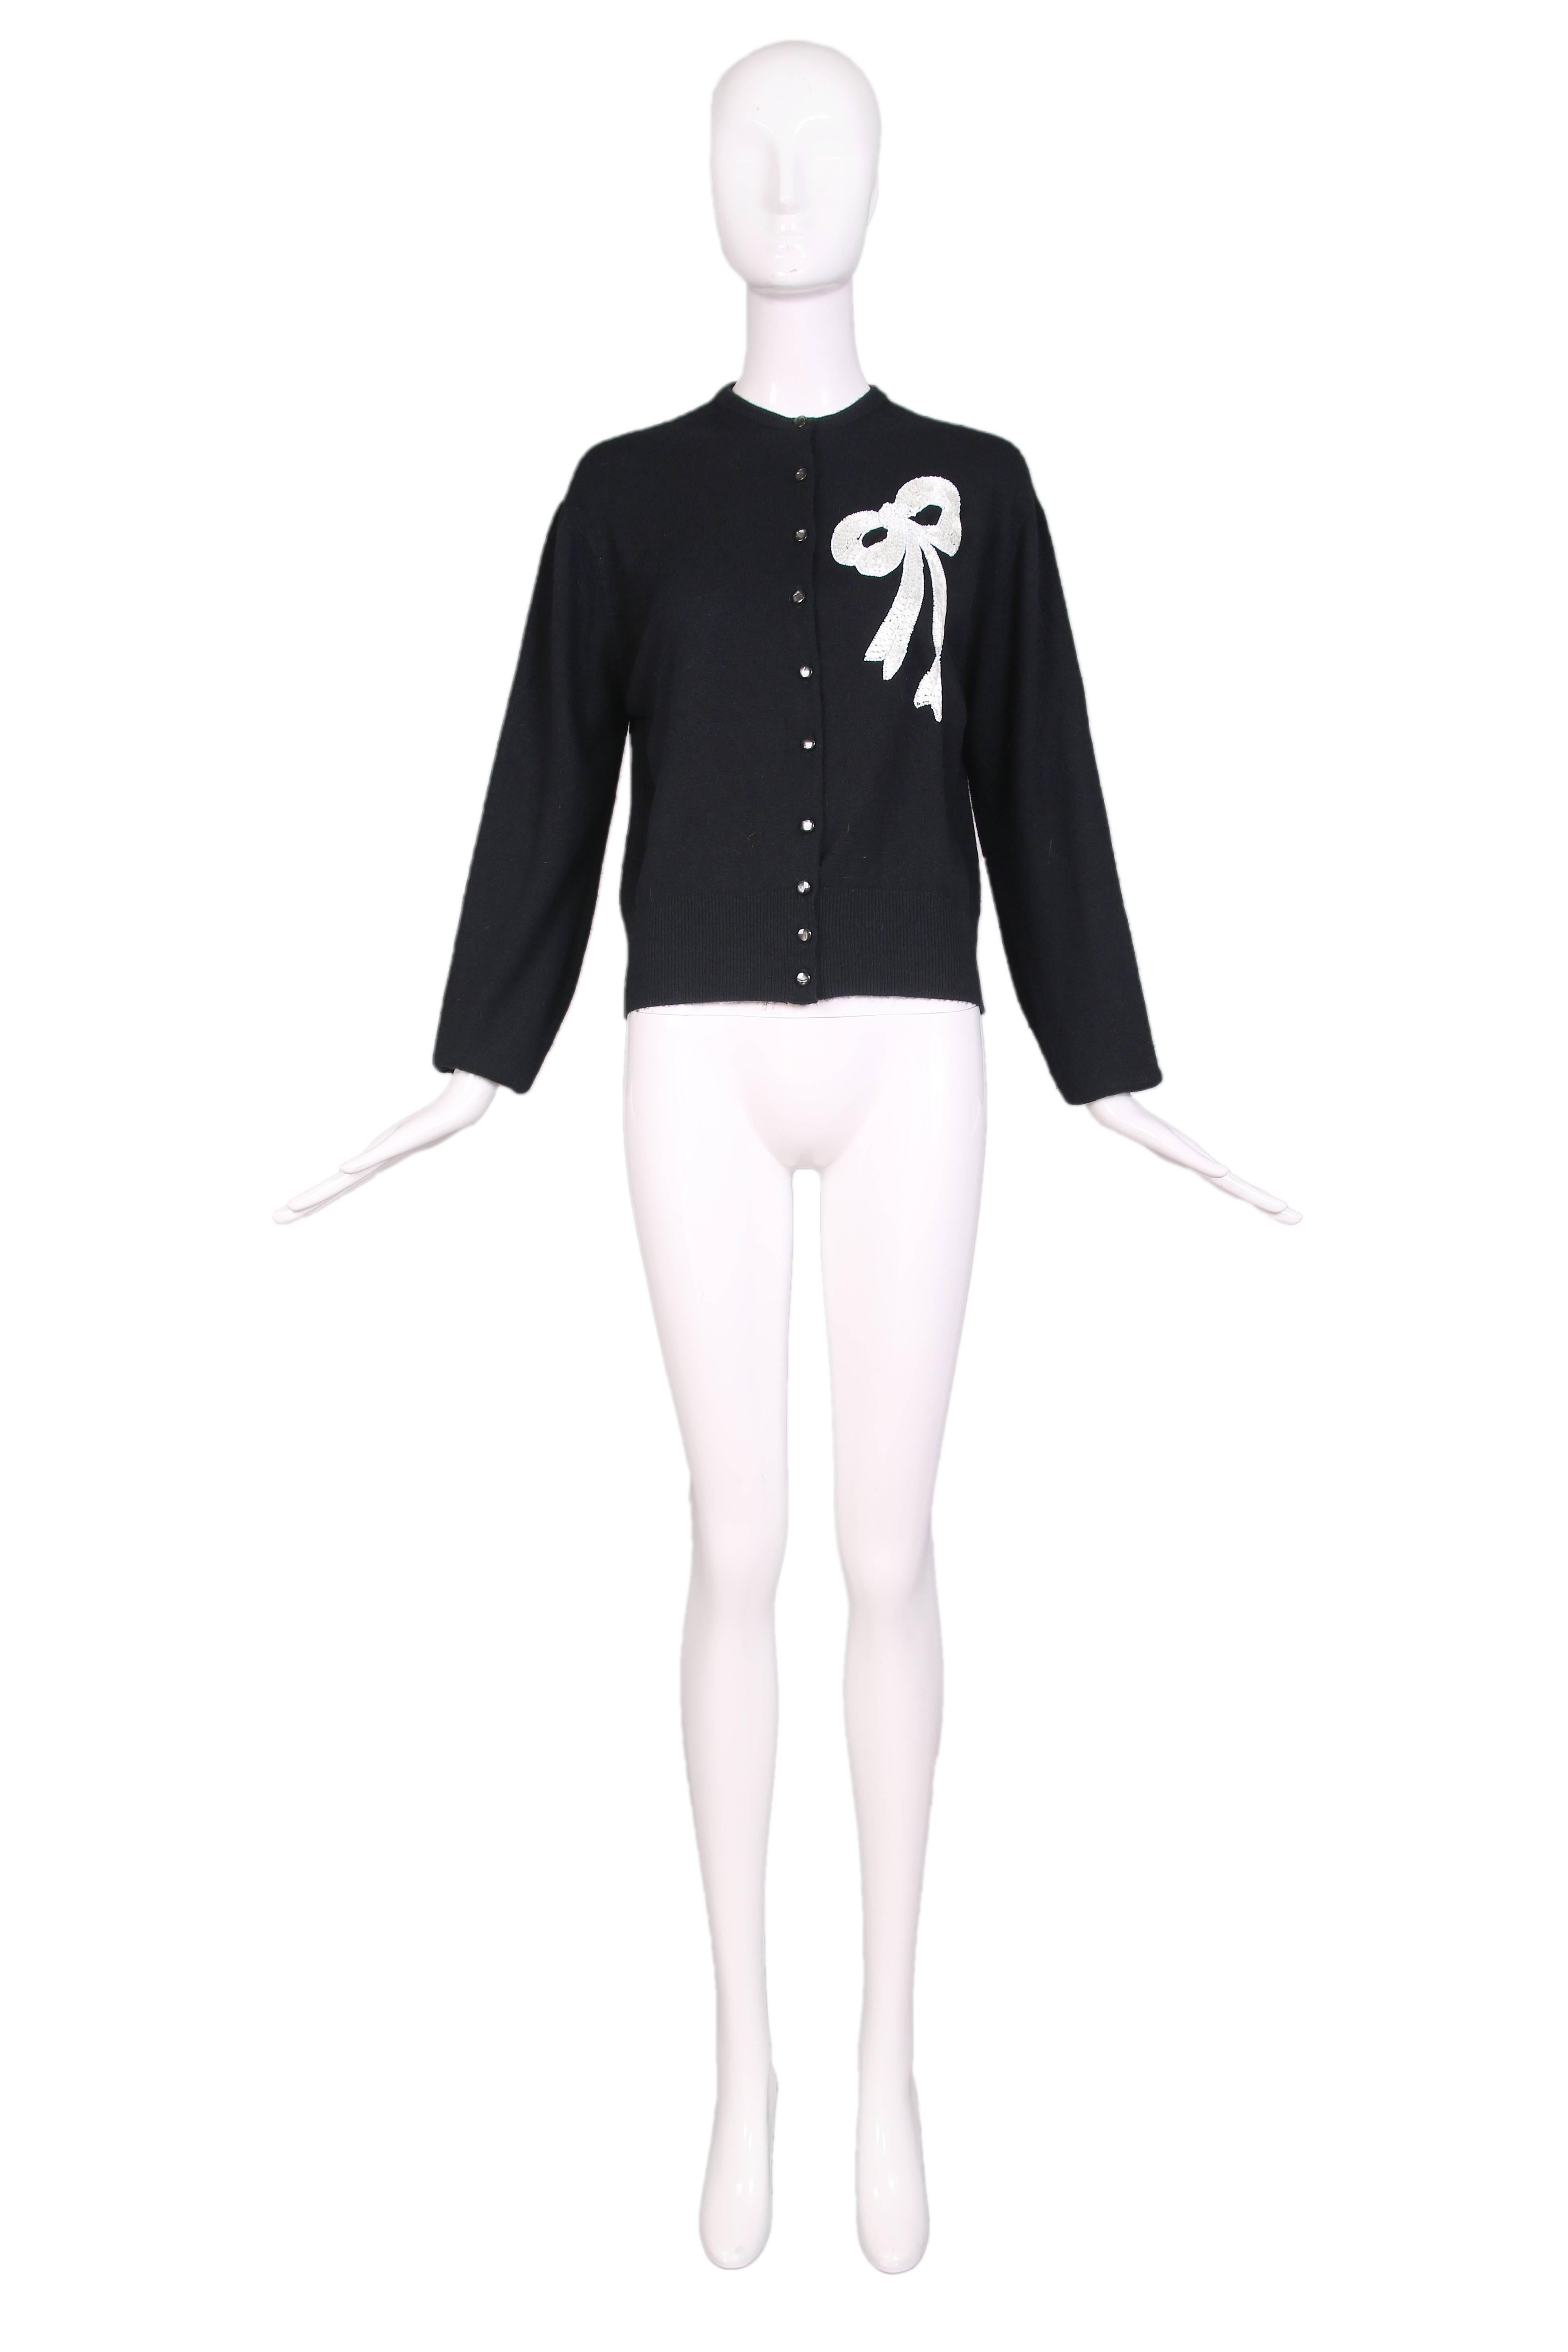 Vintage Schiaparelli black cashmere long sleeved cardigan sweater with pearlized black buttons down the front and silver beading in the shape of a bow embroidered on left front. In excellent condition. 
MEASUREMENTS (in inches):
Bust - 42
Waist -